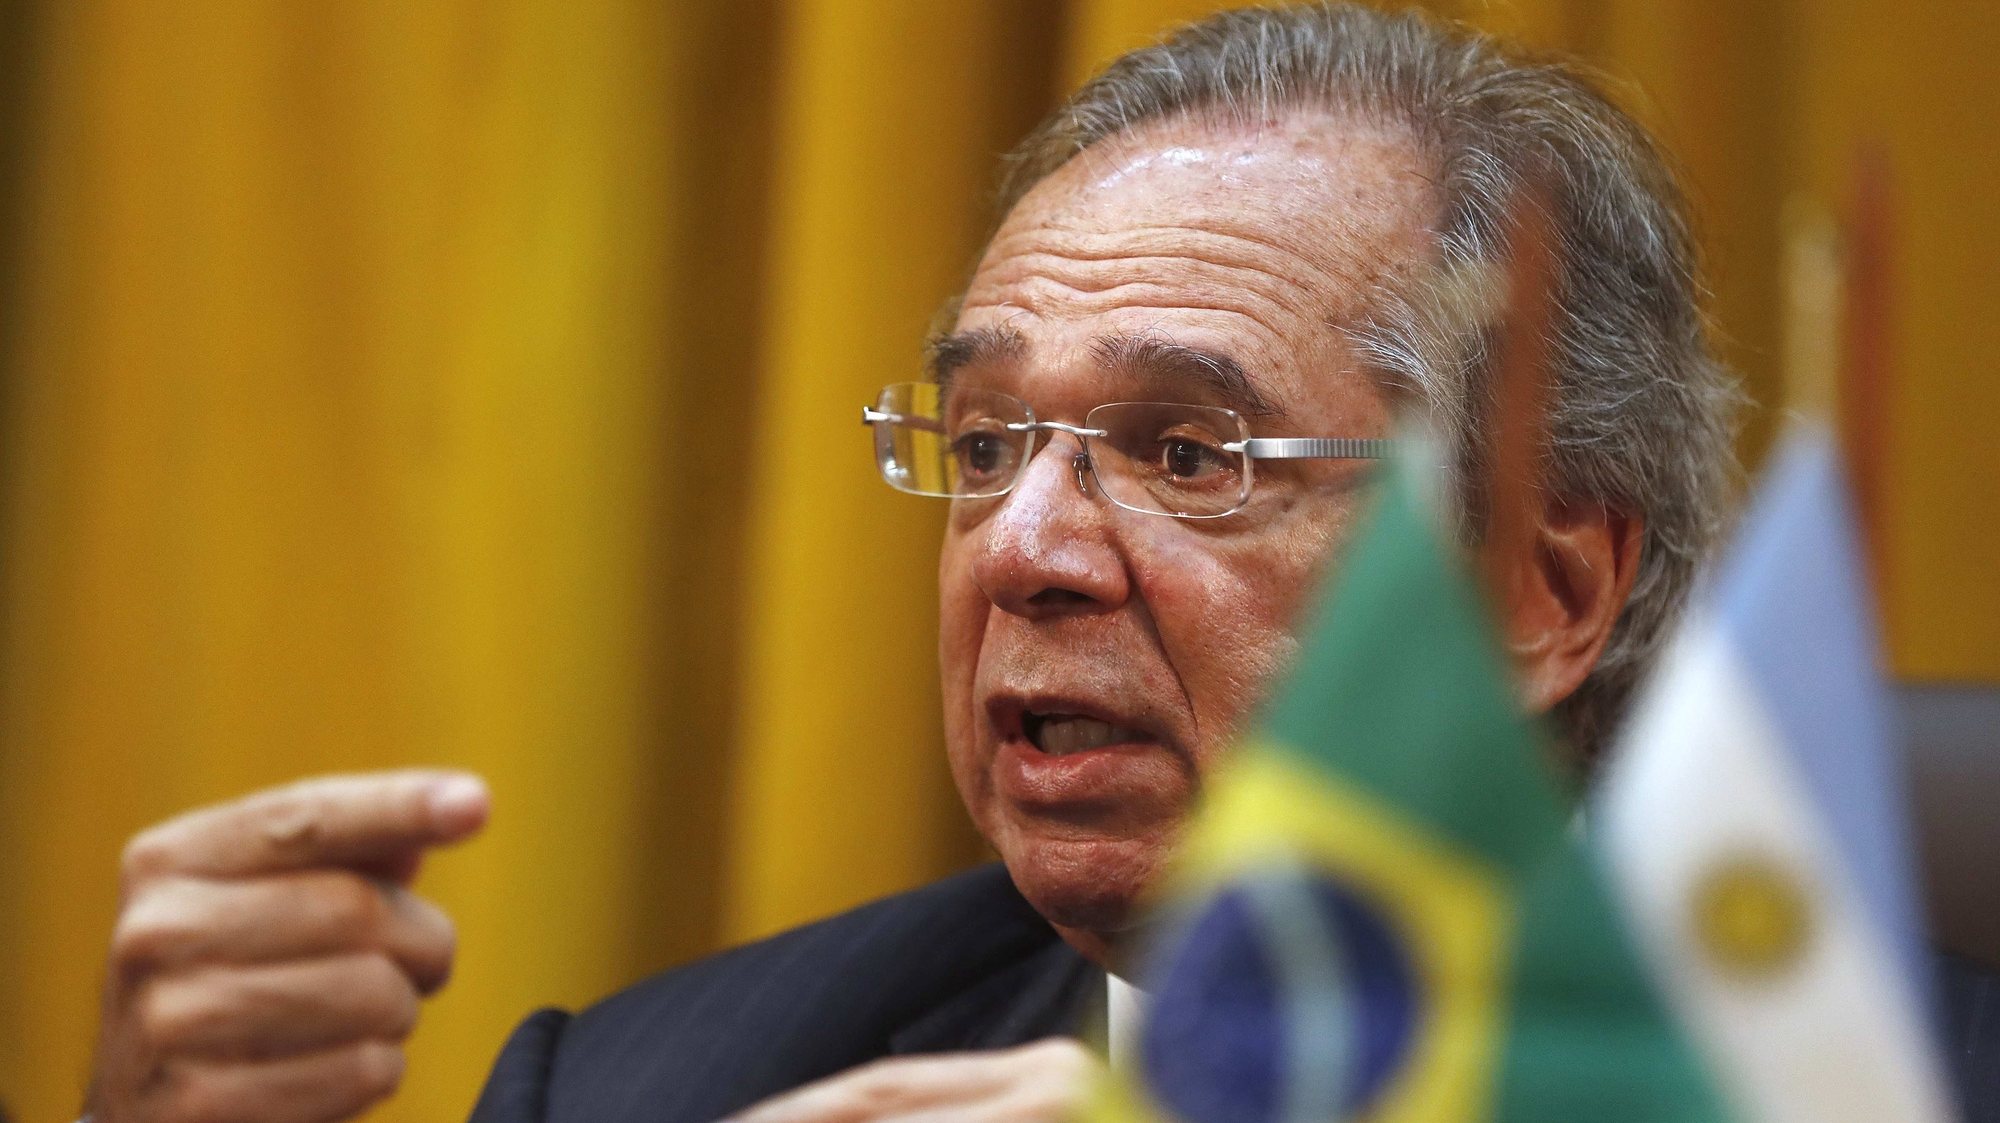 epa07824116 Brazilian Minister of Economy Paulo Guedes speaks during a press conference after a meeting with the Minister of Production and Labor of Argentina, Dante Sica, in Rio de Janeiro, Brazil, 06 September 2019. Both nations again postponed the date for the start of bilateral free trade on cars. It will be now by 2029, in an agreement signed Friday that establishes &quot;more stable rules&quot; for the exchange and despite reaffirming their commitment to economic opening. Automobile trade is one of the main exceptions within the Mercosur free trade block, and is regulated by bilateral and non-multilateral agreements.  EPA/MARCELO SAYAO